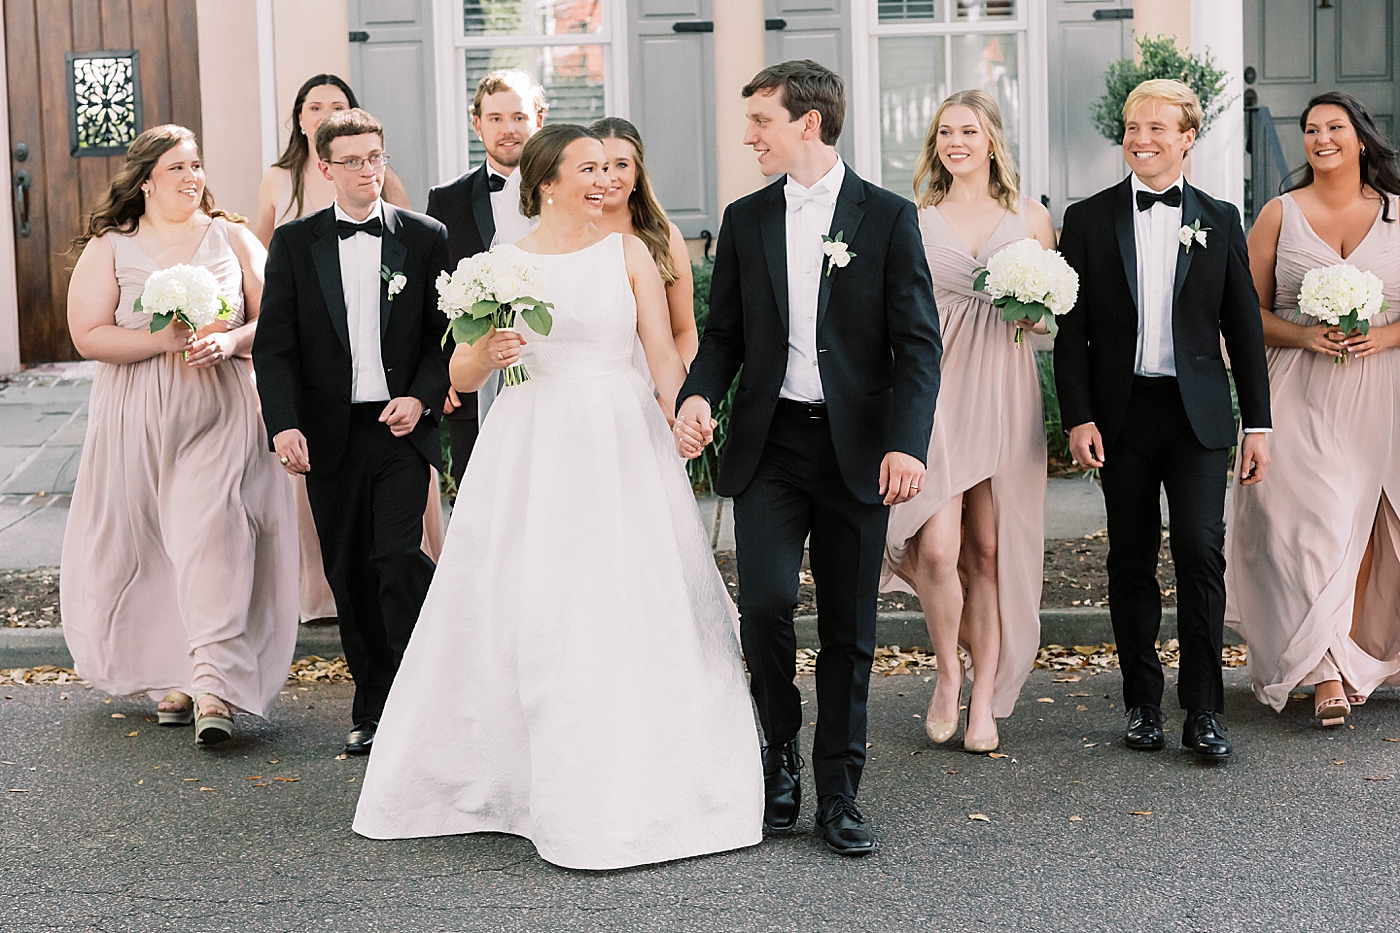 Bride and groom laughing with their bridal party | Carters Event Co